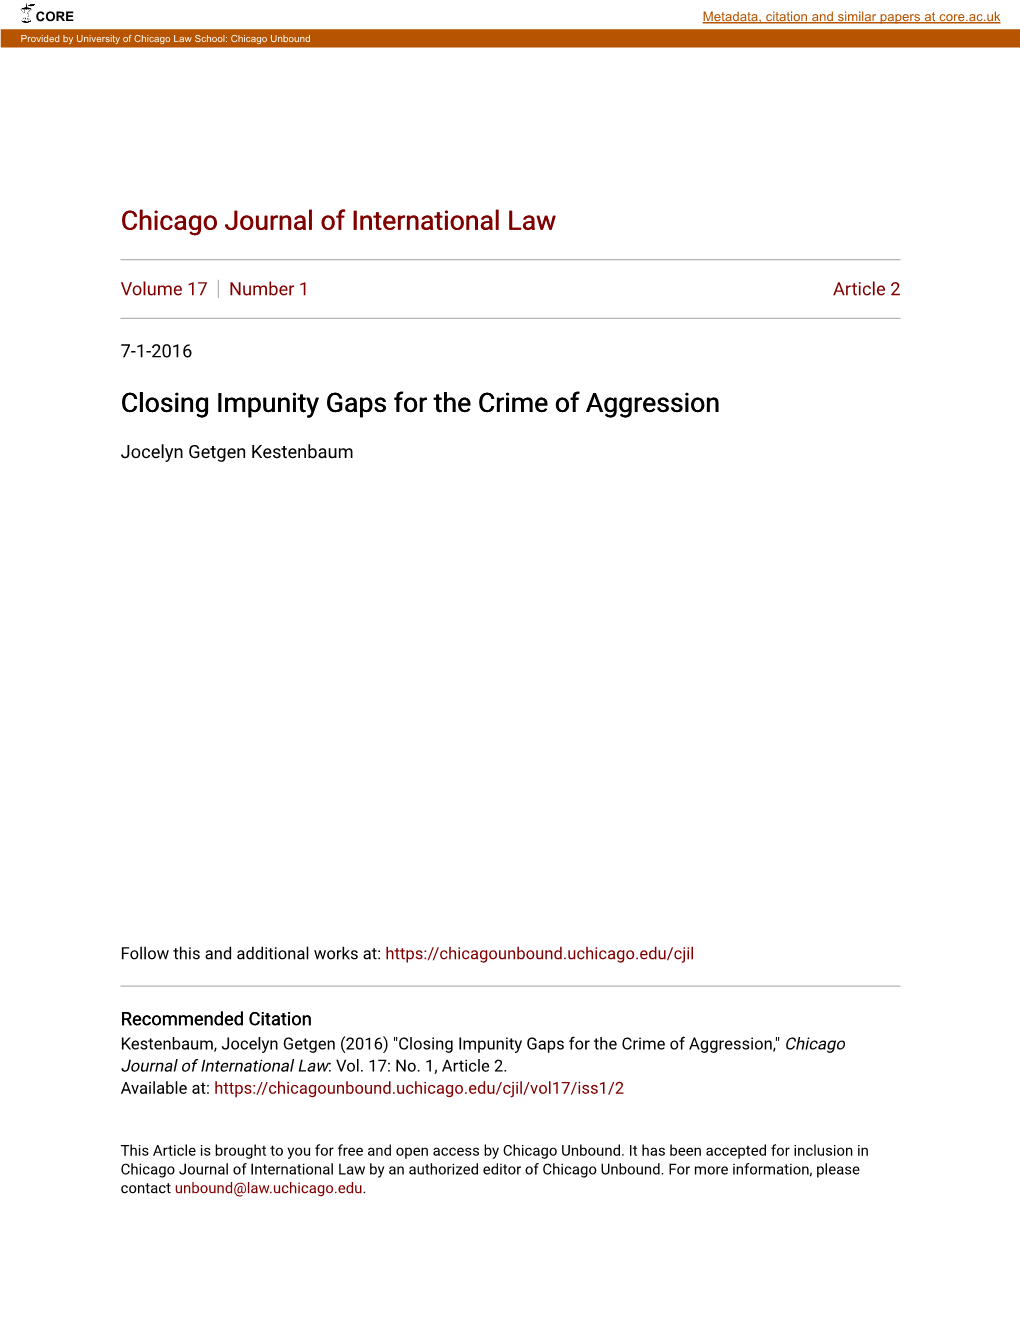 Closing Impunity Gaps for the Crime of Aggression